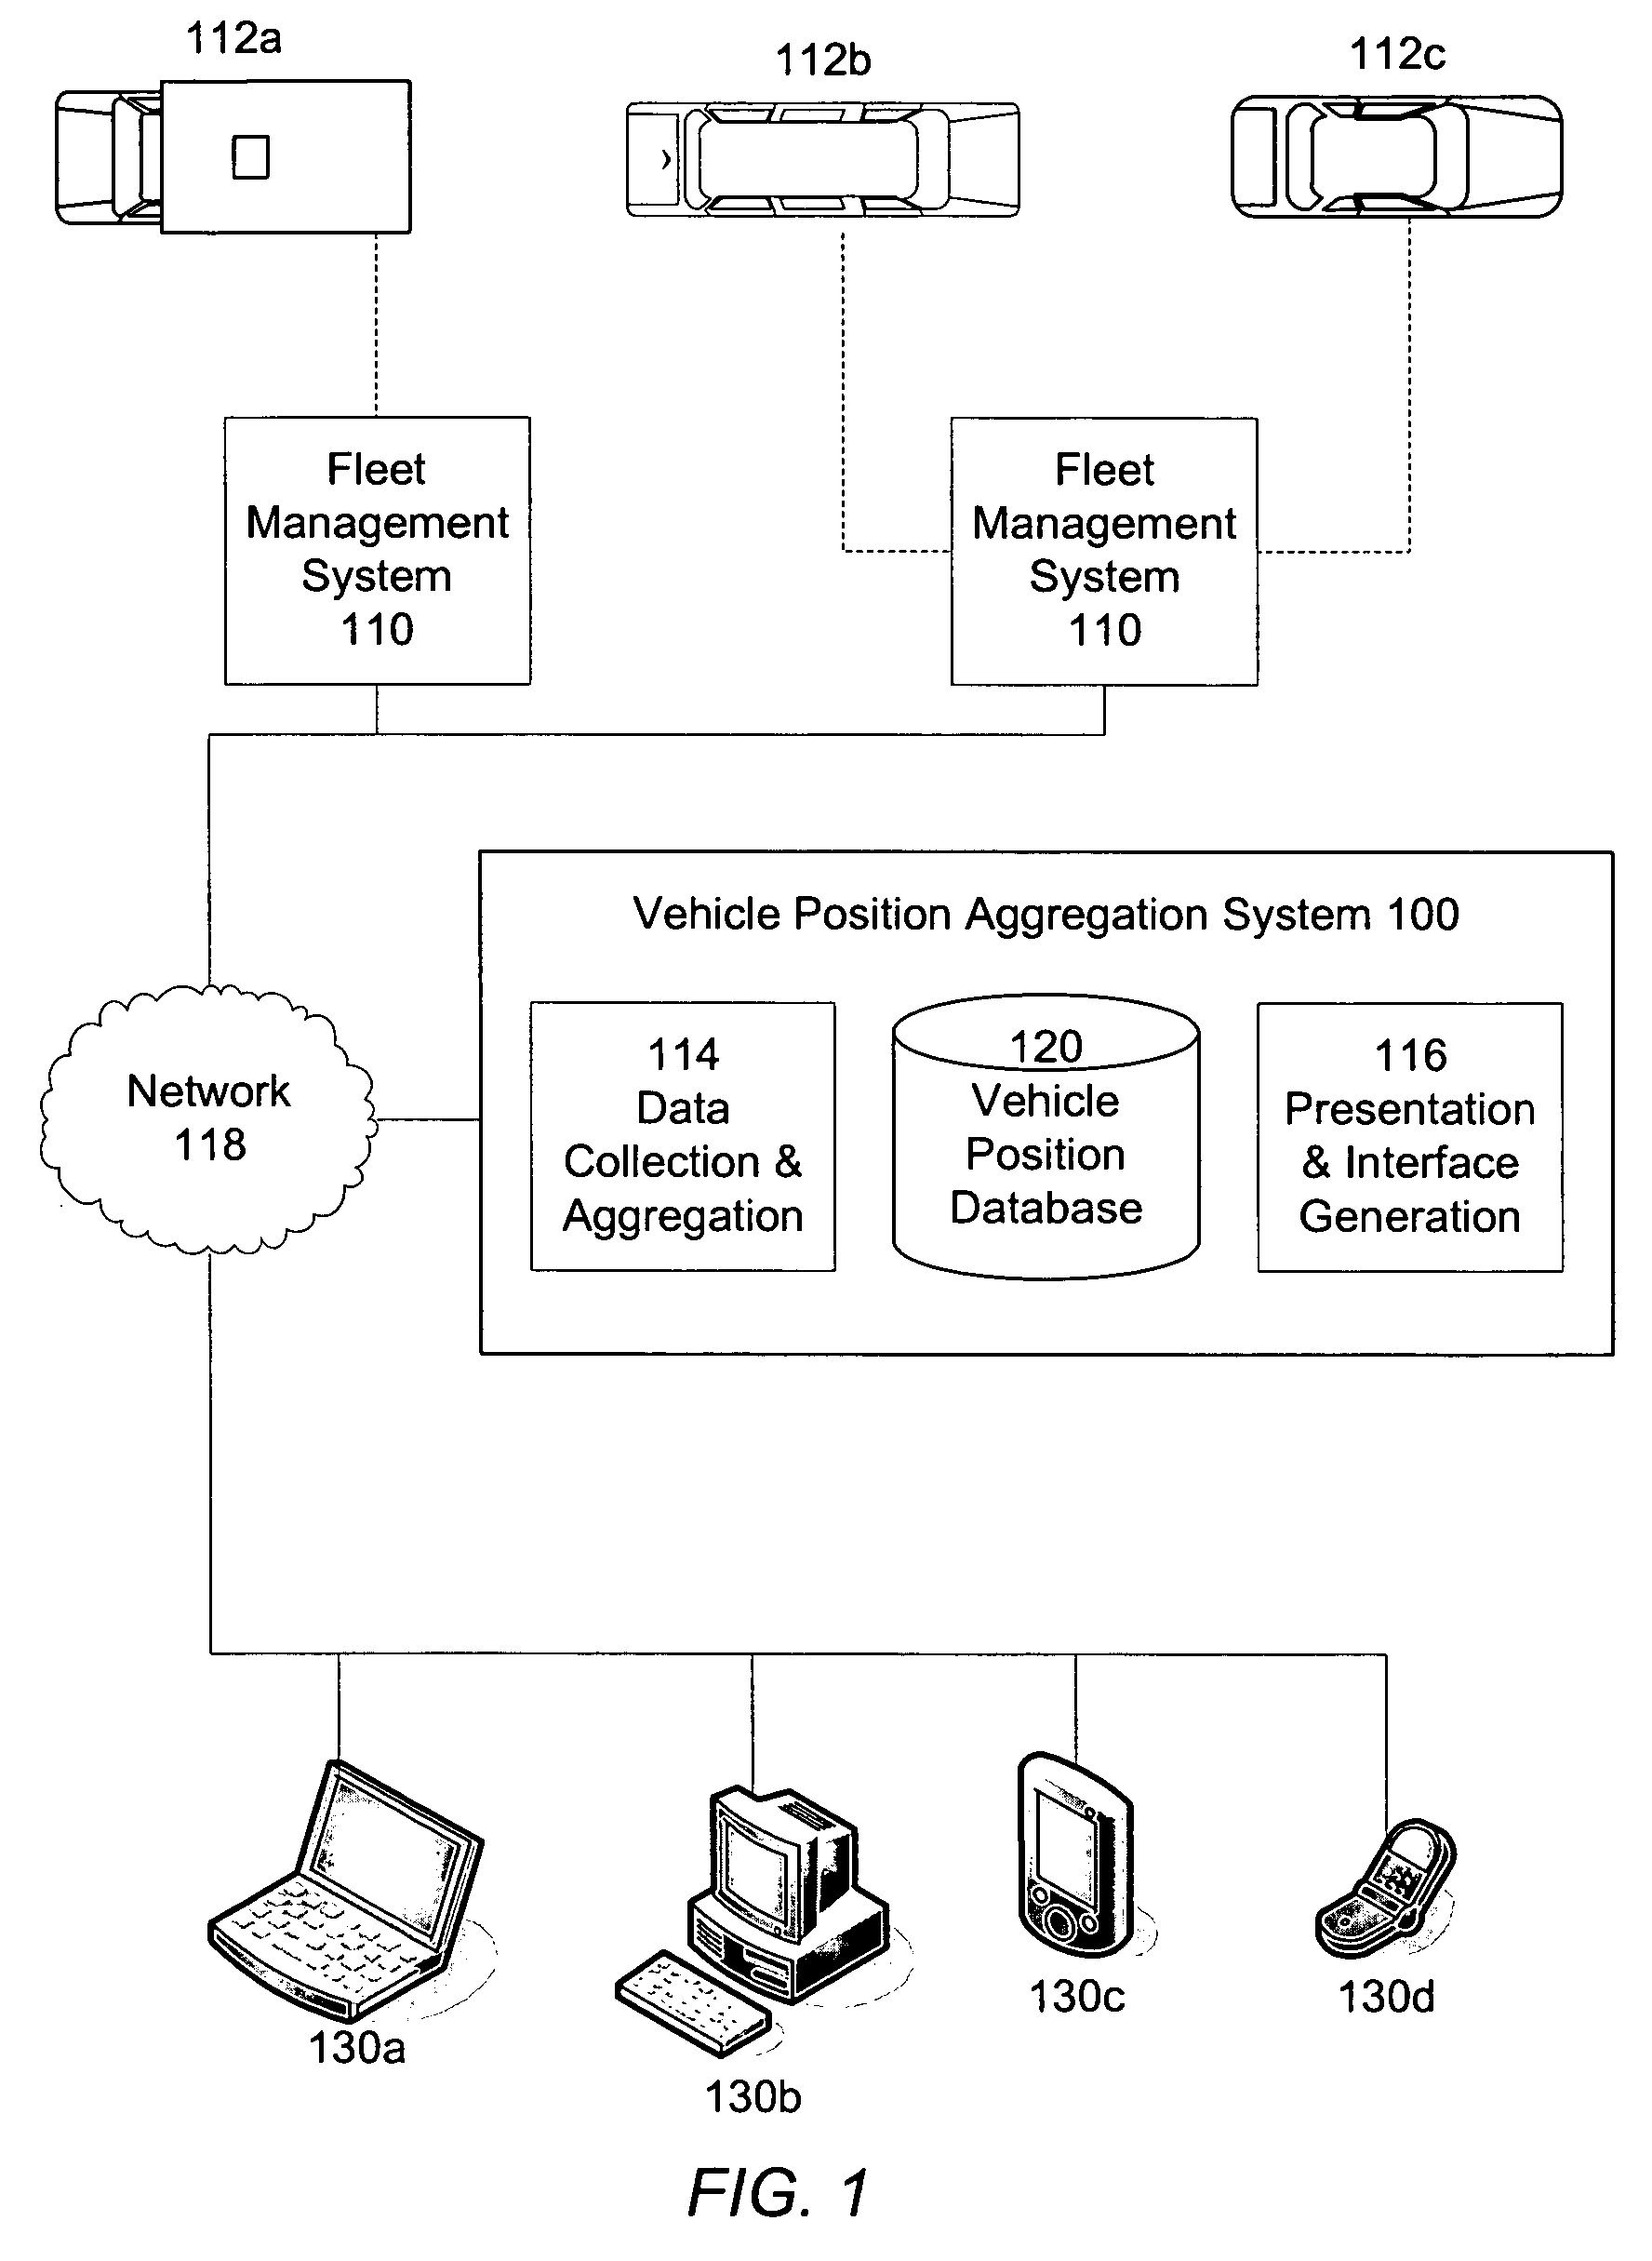 User location driven identification of service vehicles